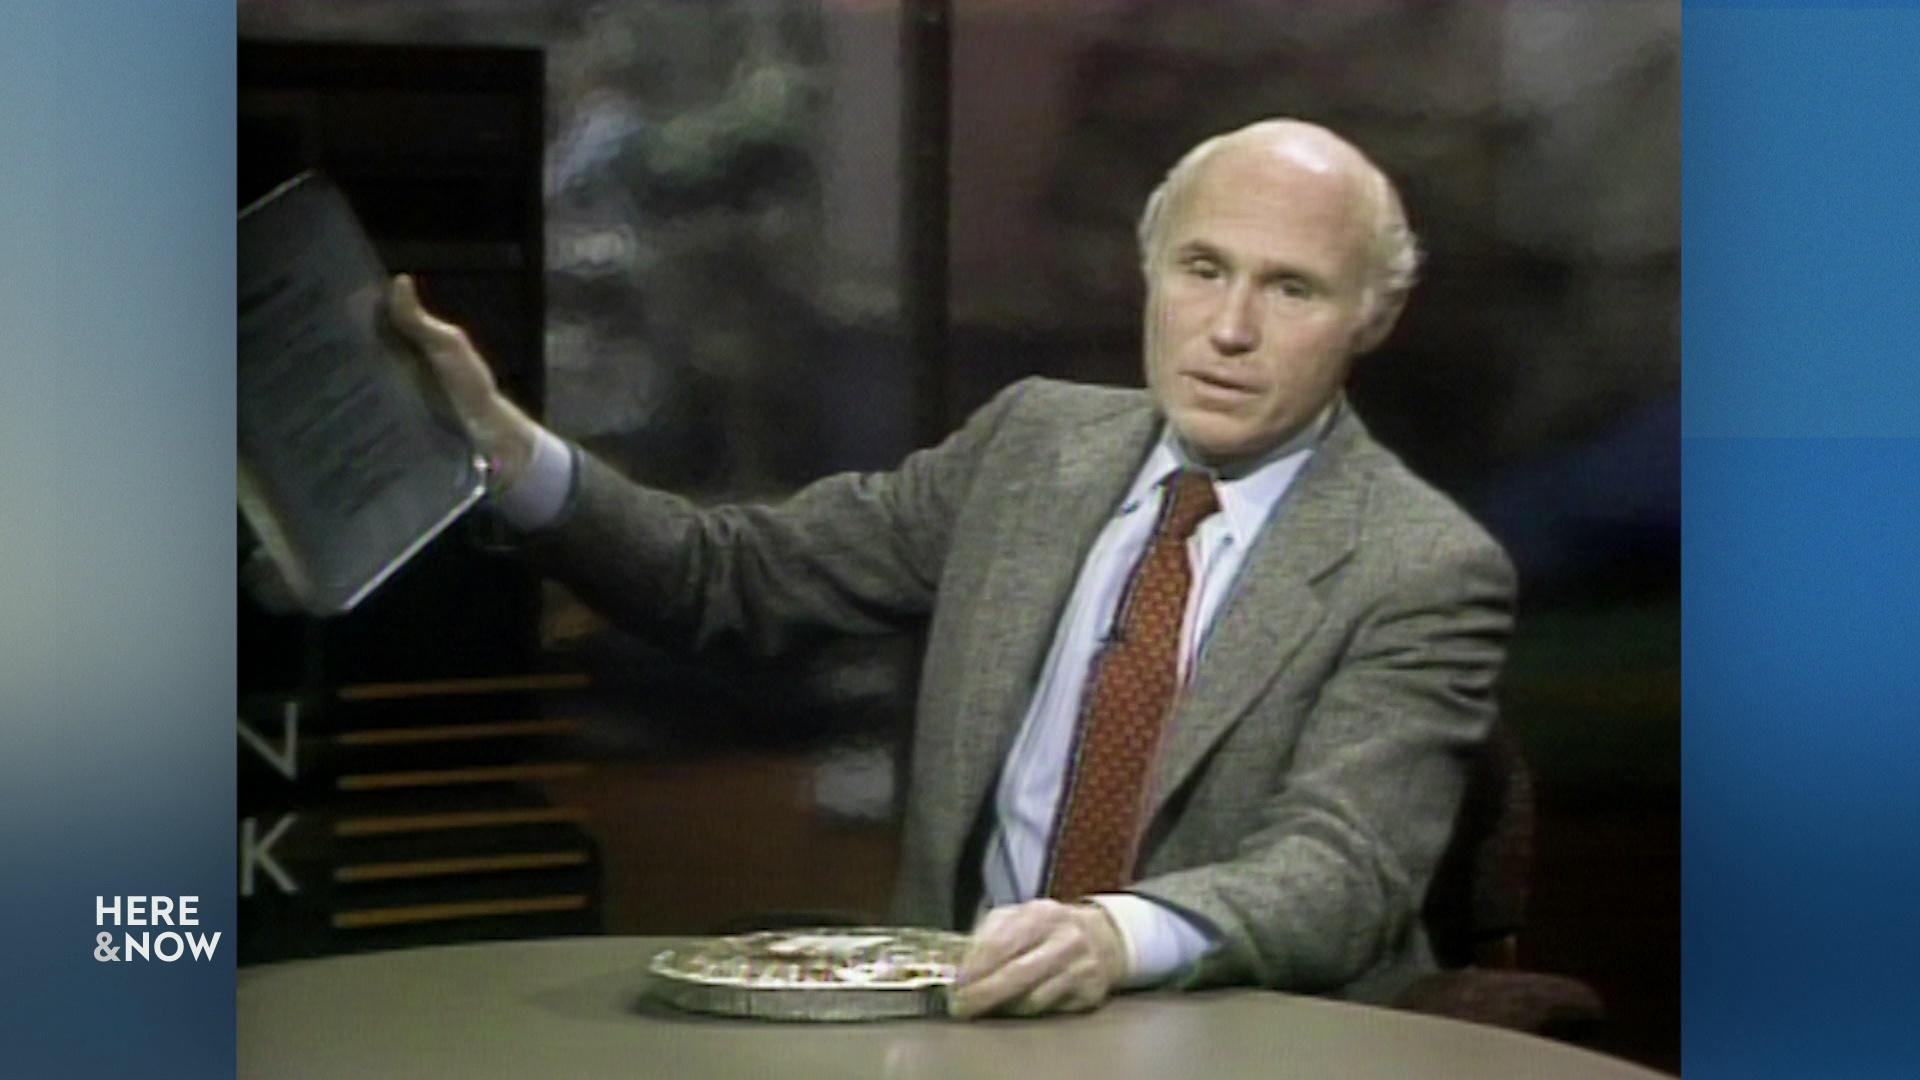 A still image from a video shows Herb Kohl holding a stack of papers behind a desk.